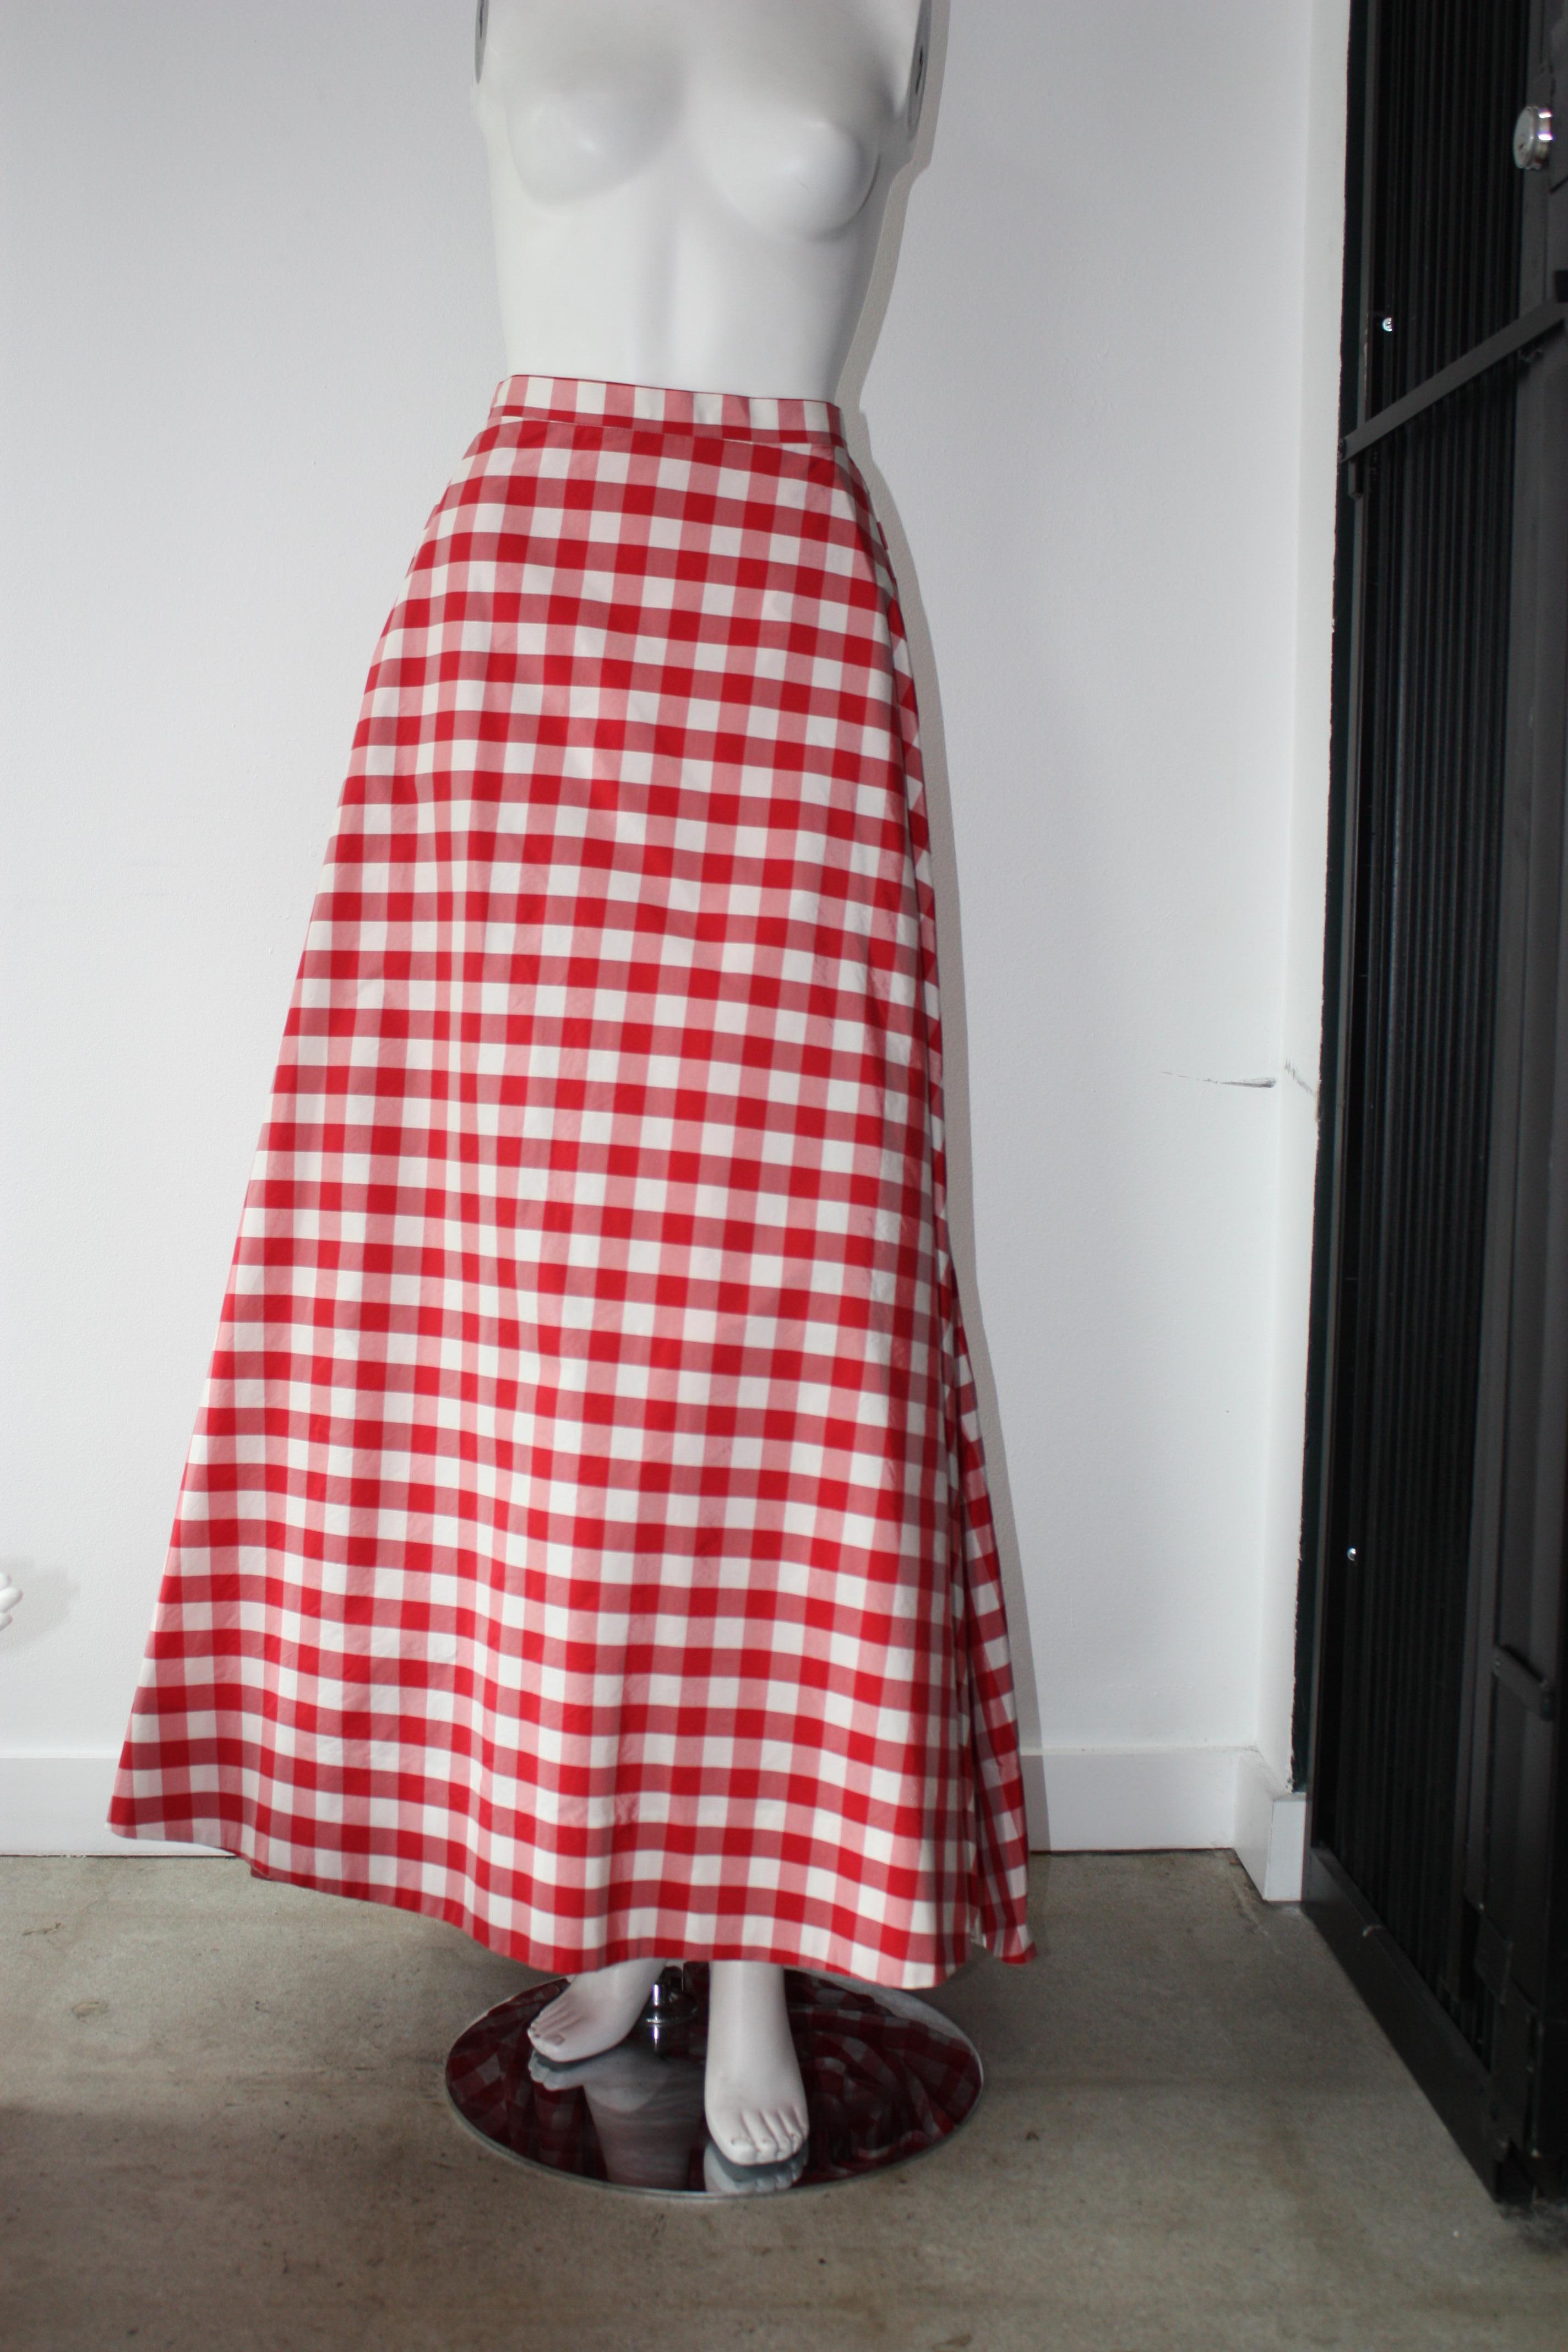 Michael Kors Runway gingham red and white maxi skirt. High waisted fit. Gathered detail on the back waistband. Back zip.
Tag removed.

Silk and cotton blend.
Size 6